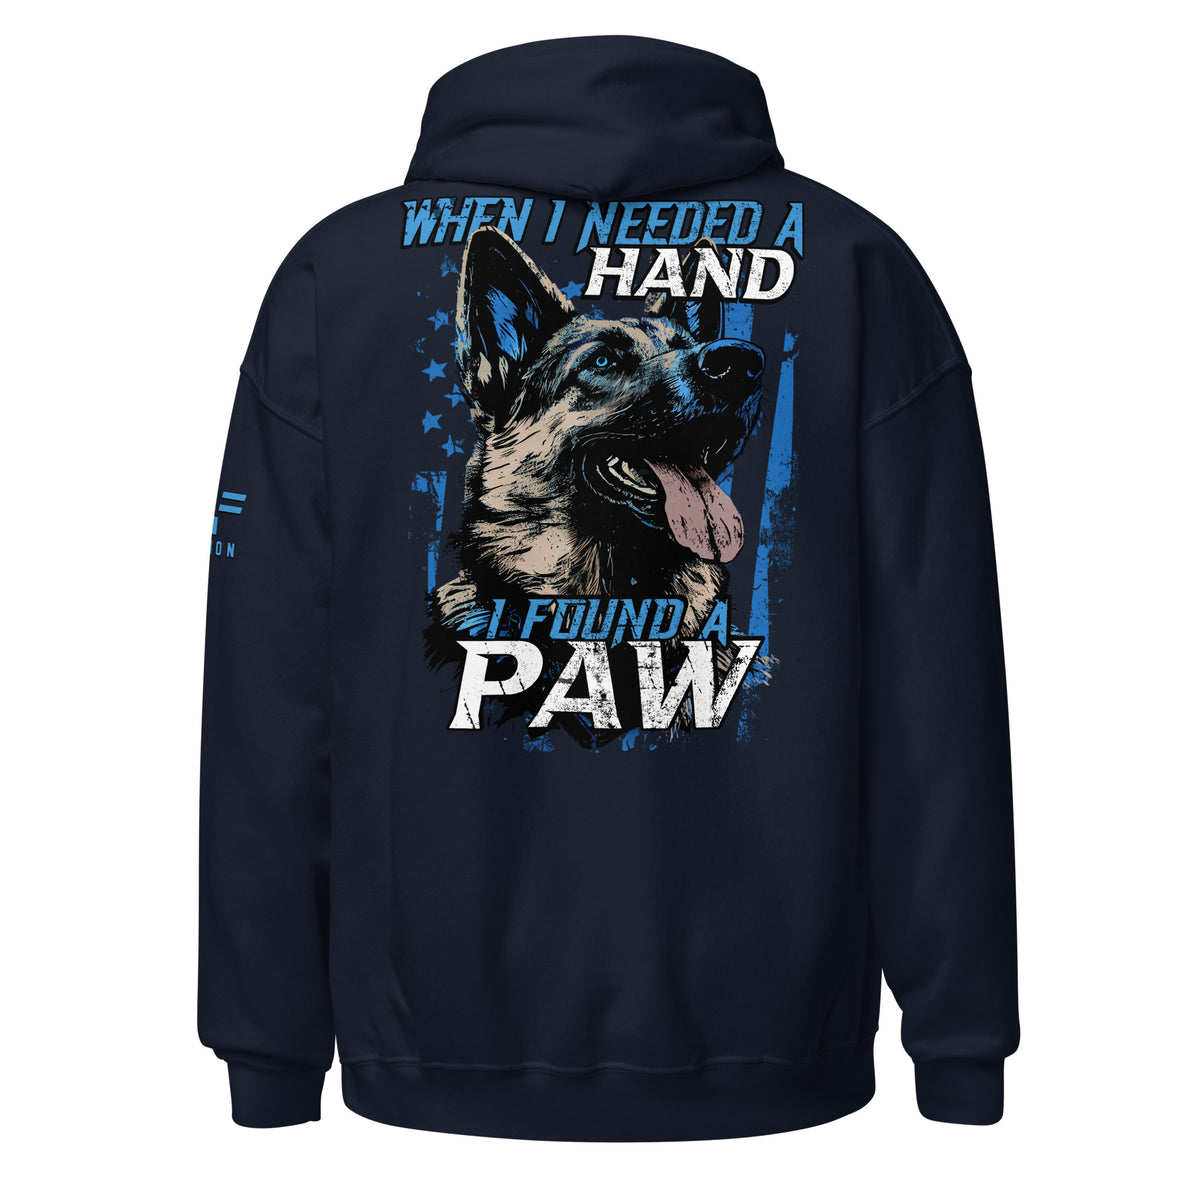 Needed a Hand. Found a Paw. Hoodie